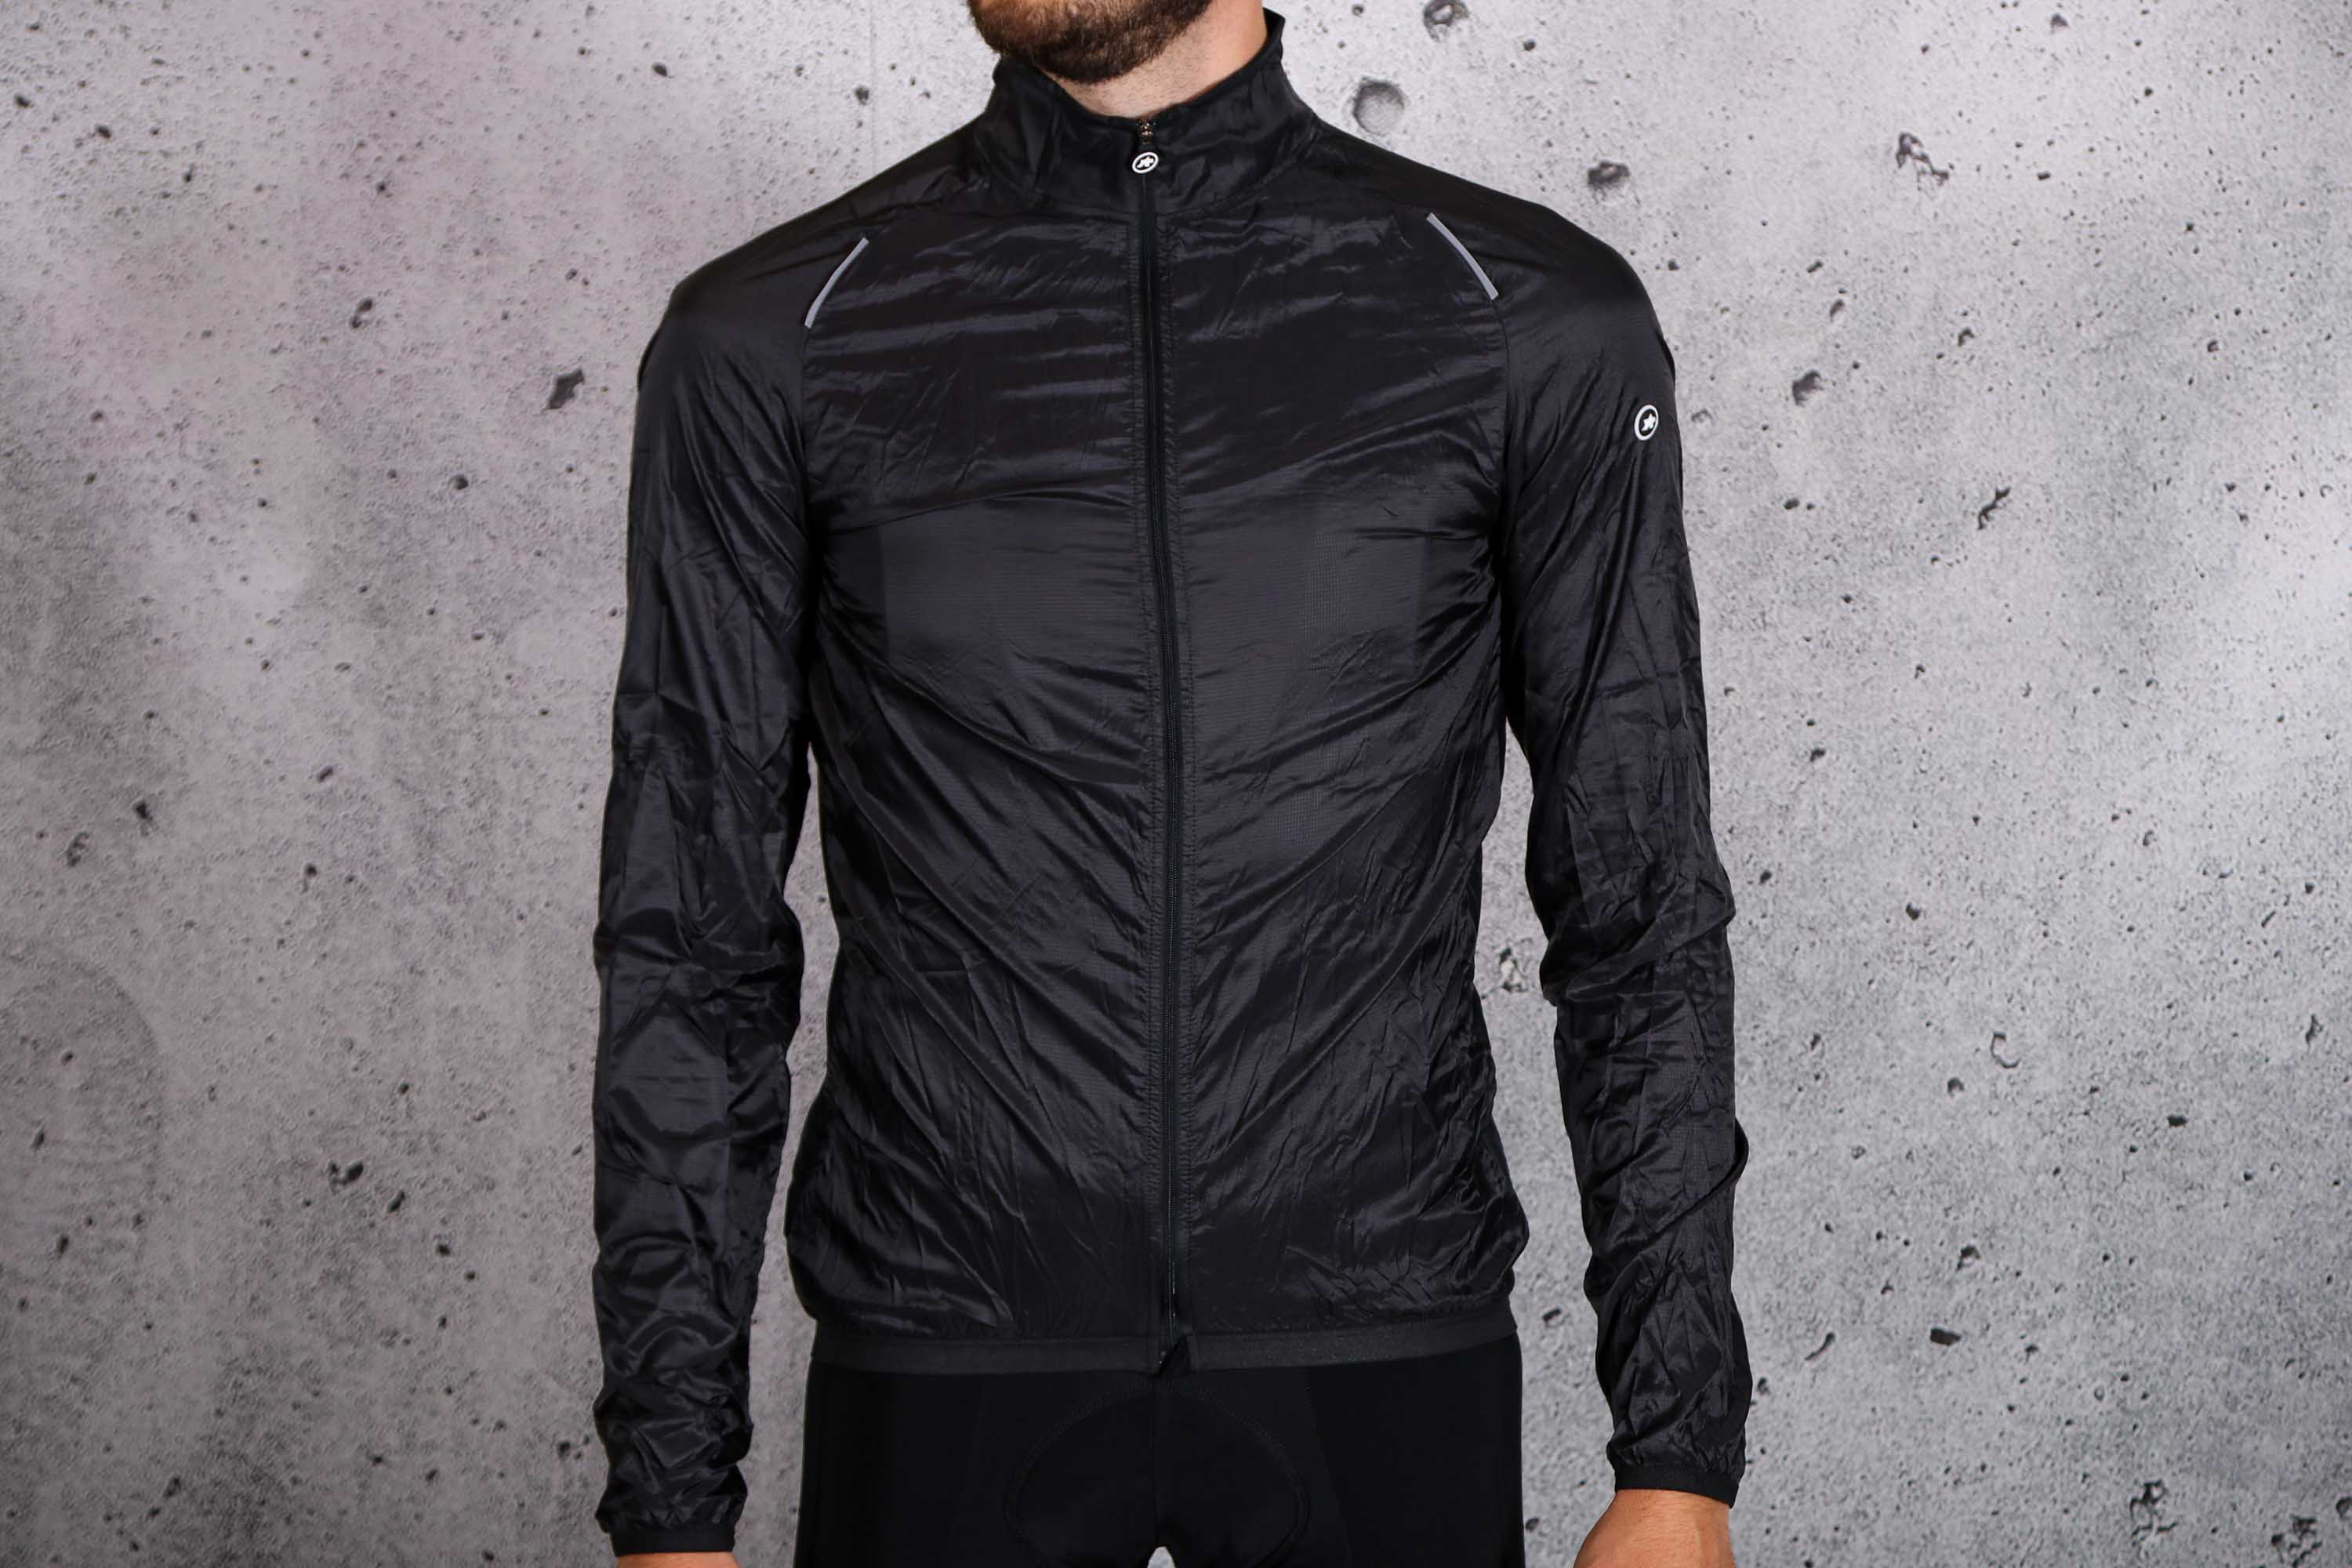 Review: Assos Mille GT Wind Jacket | road.cc